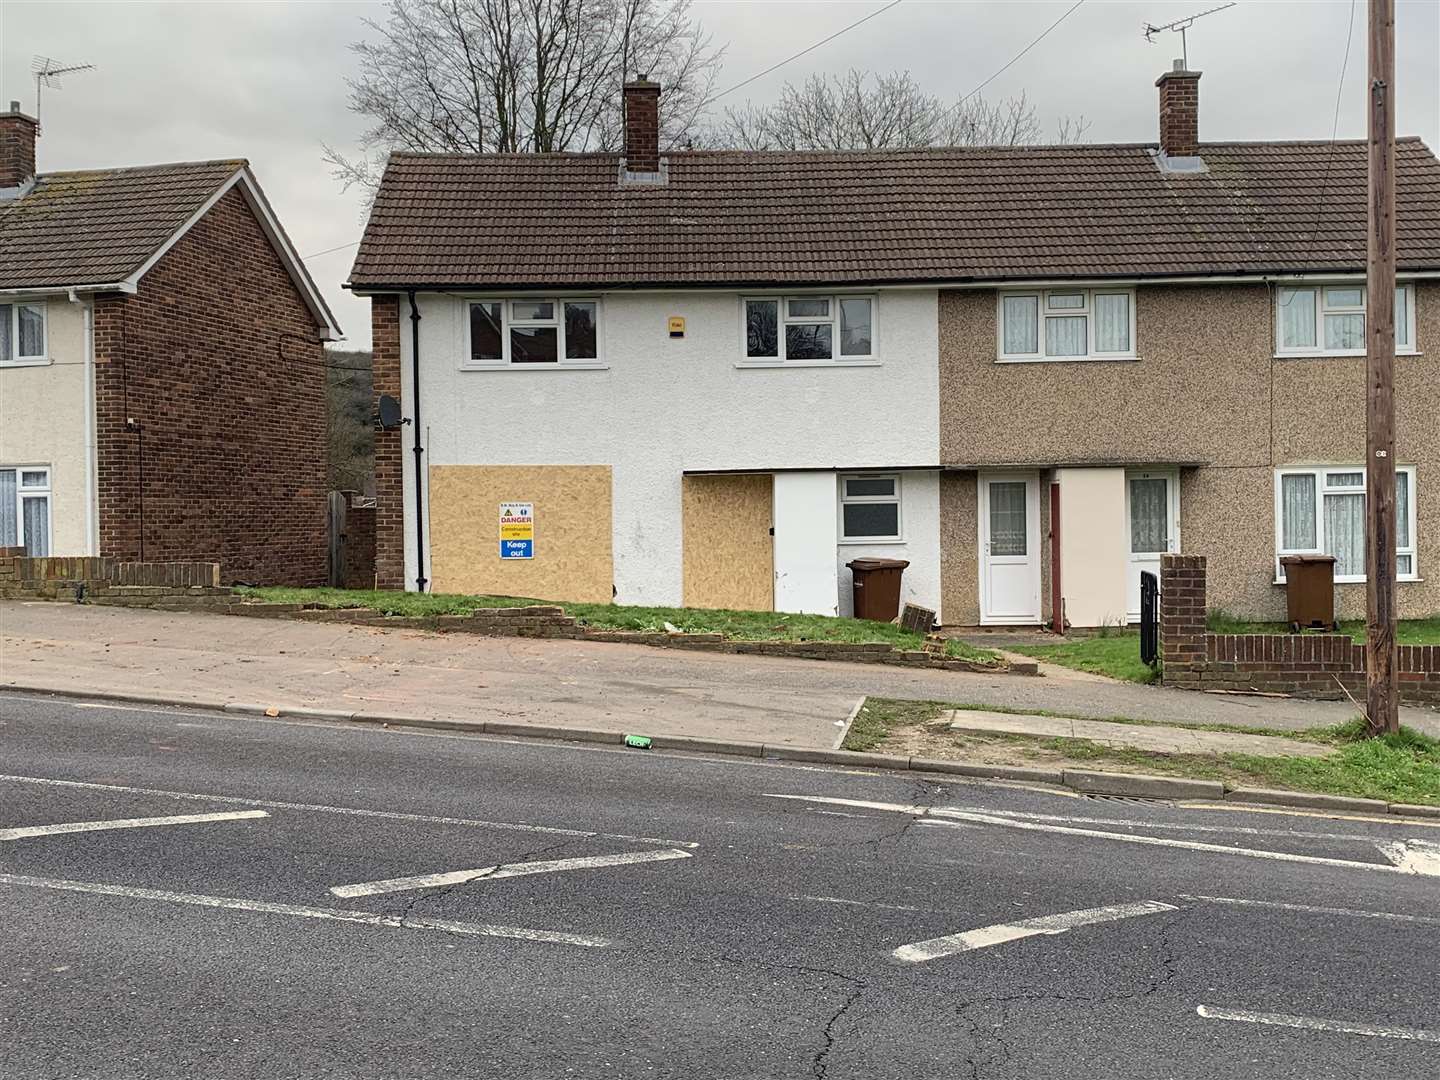 The home in Bligh Way, Strood was boarded up after the car crash (6518249)